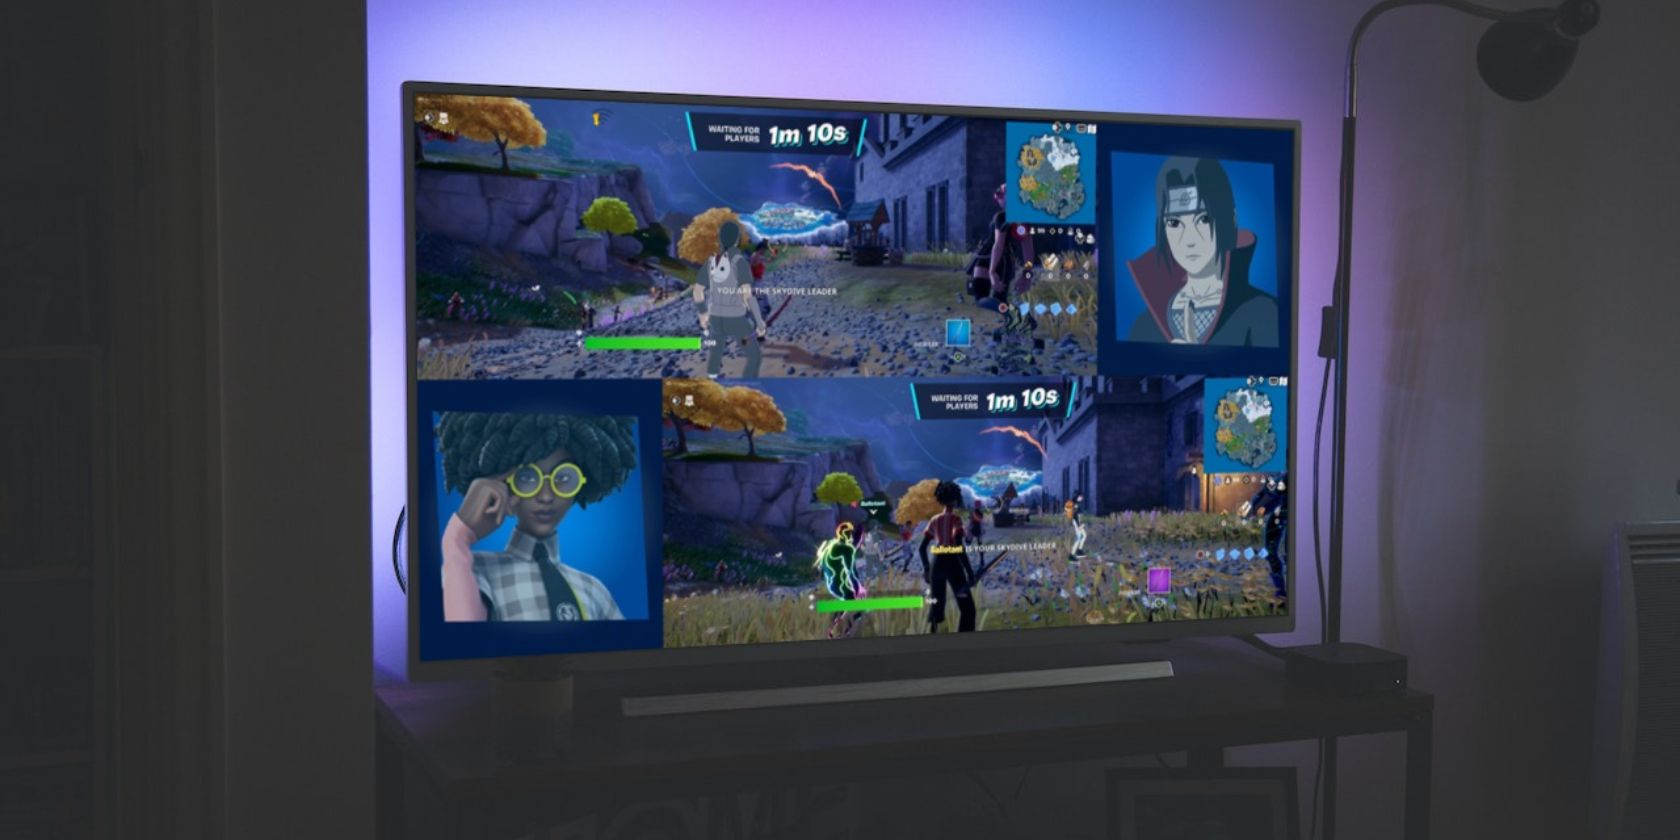 How to Use the Fortnite Split Screen